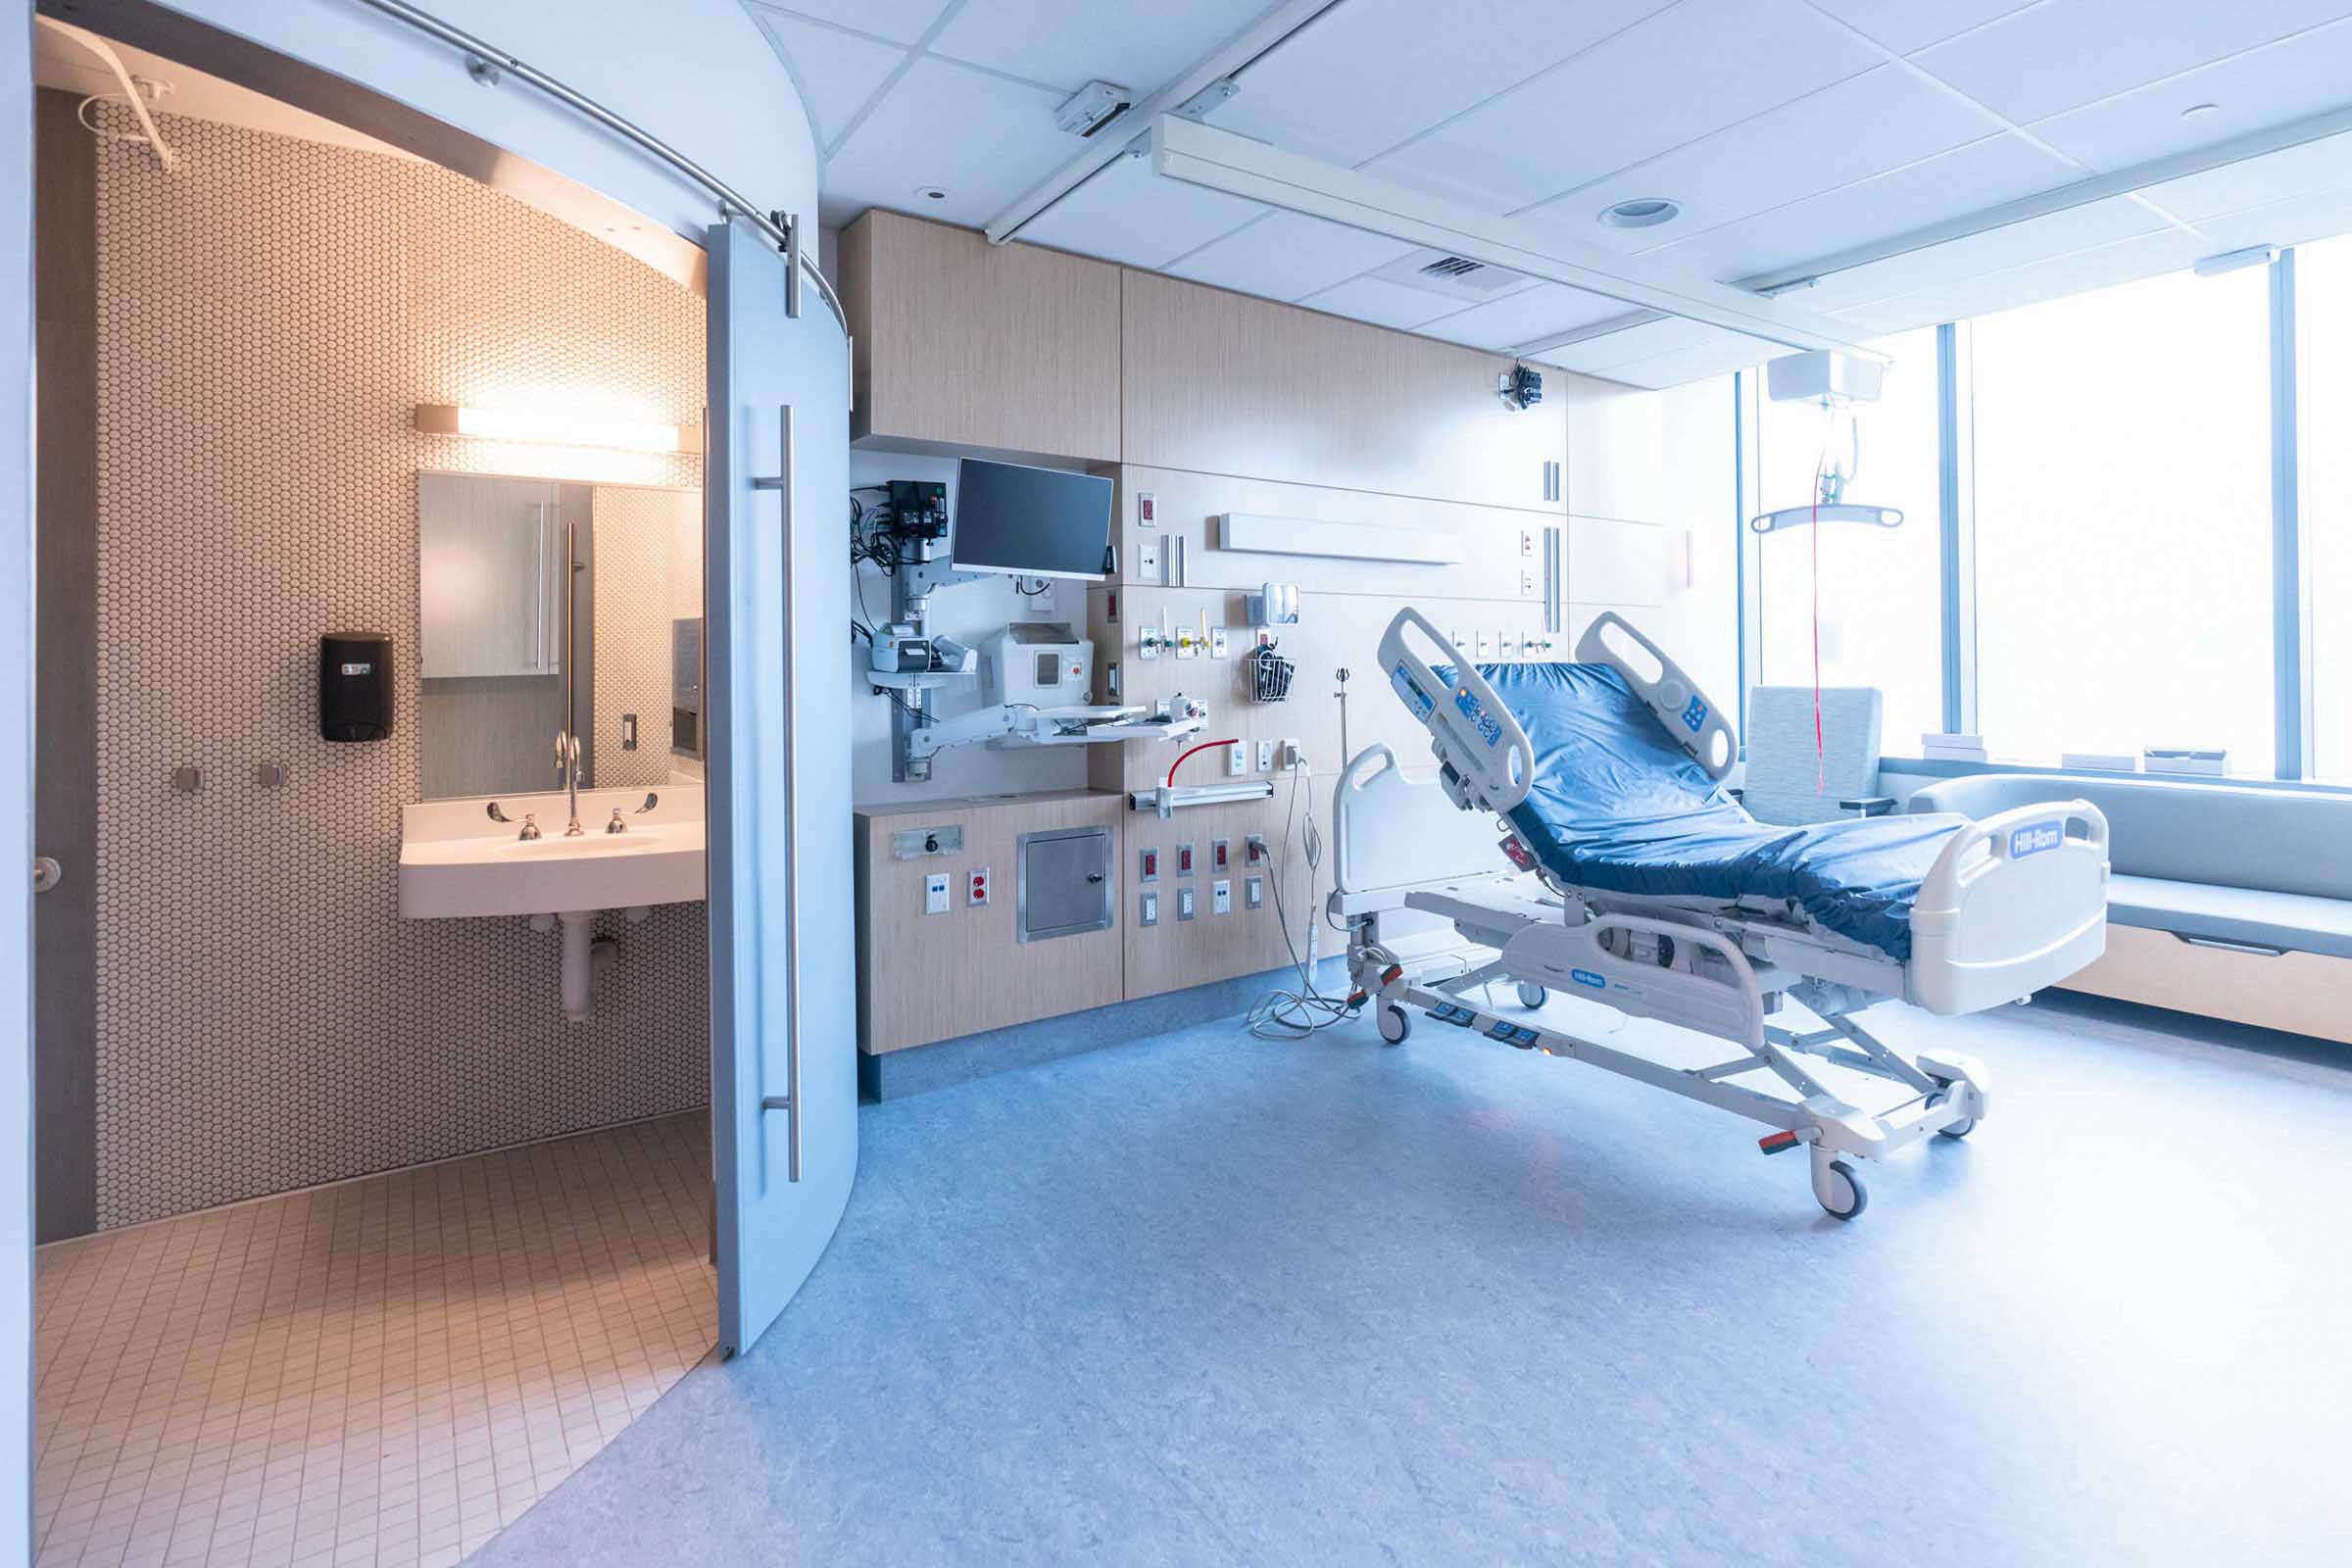 Hospital Room with the bathroom on the left and a hospital bed on the right